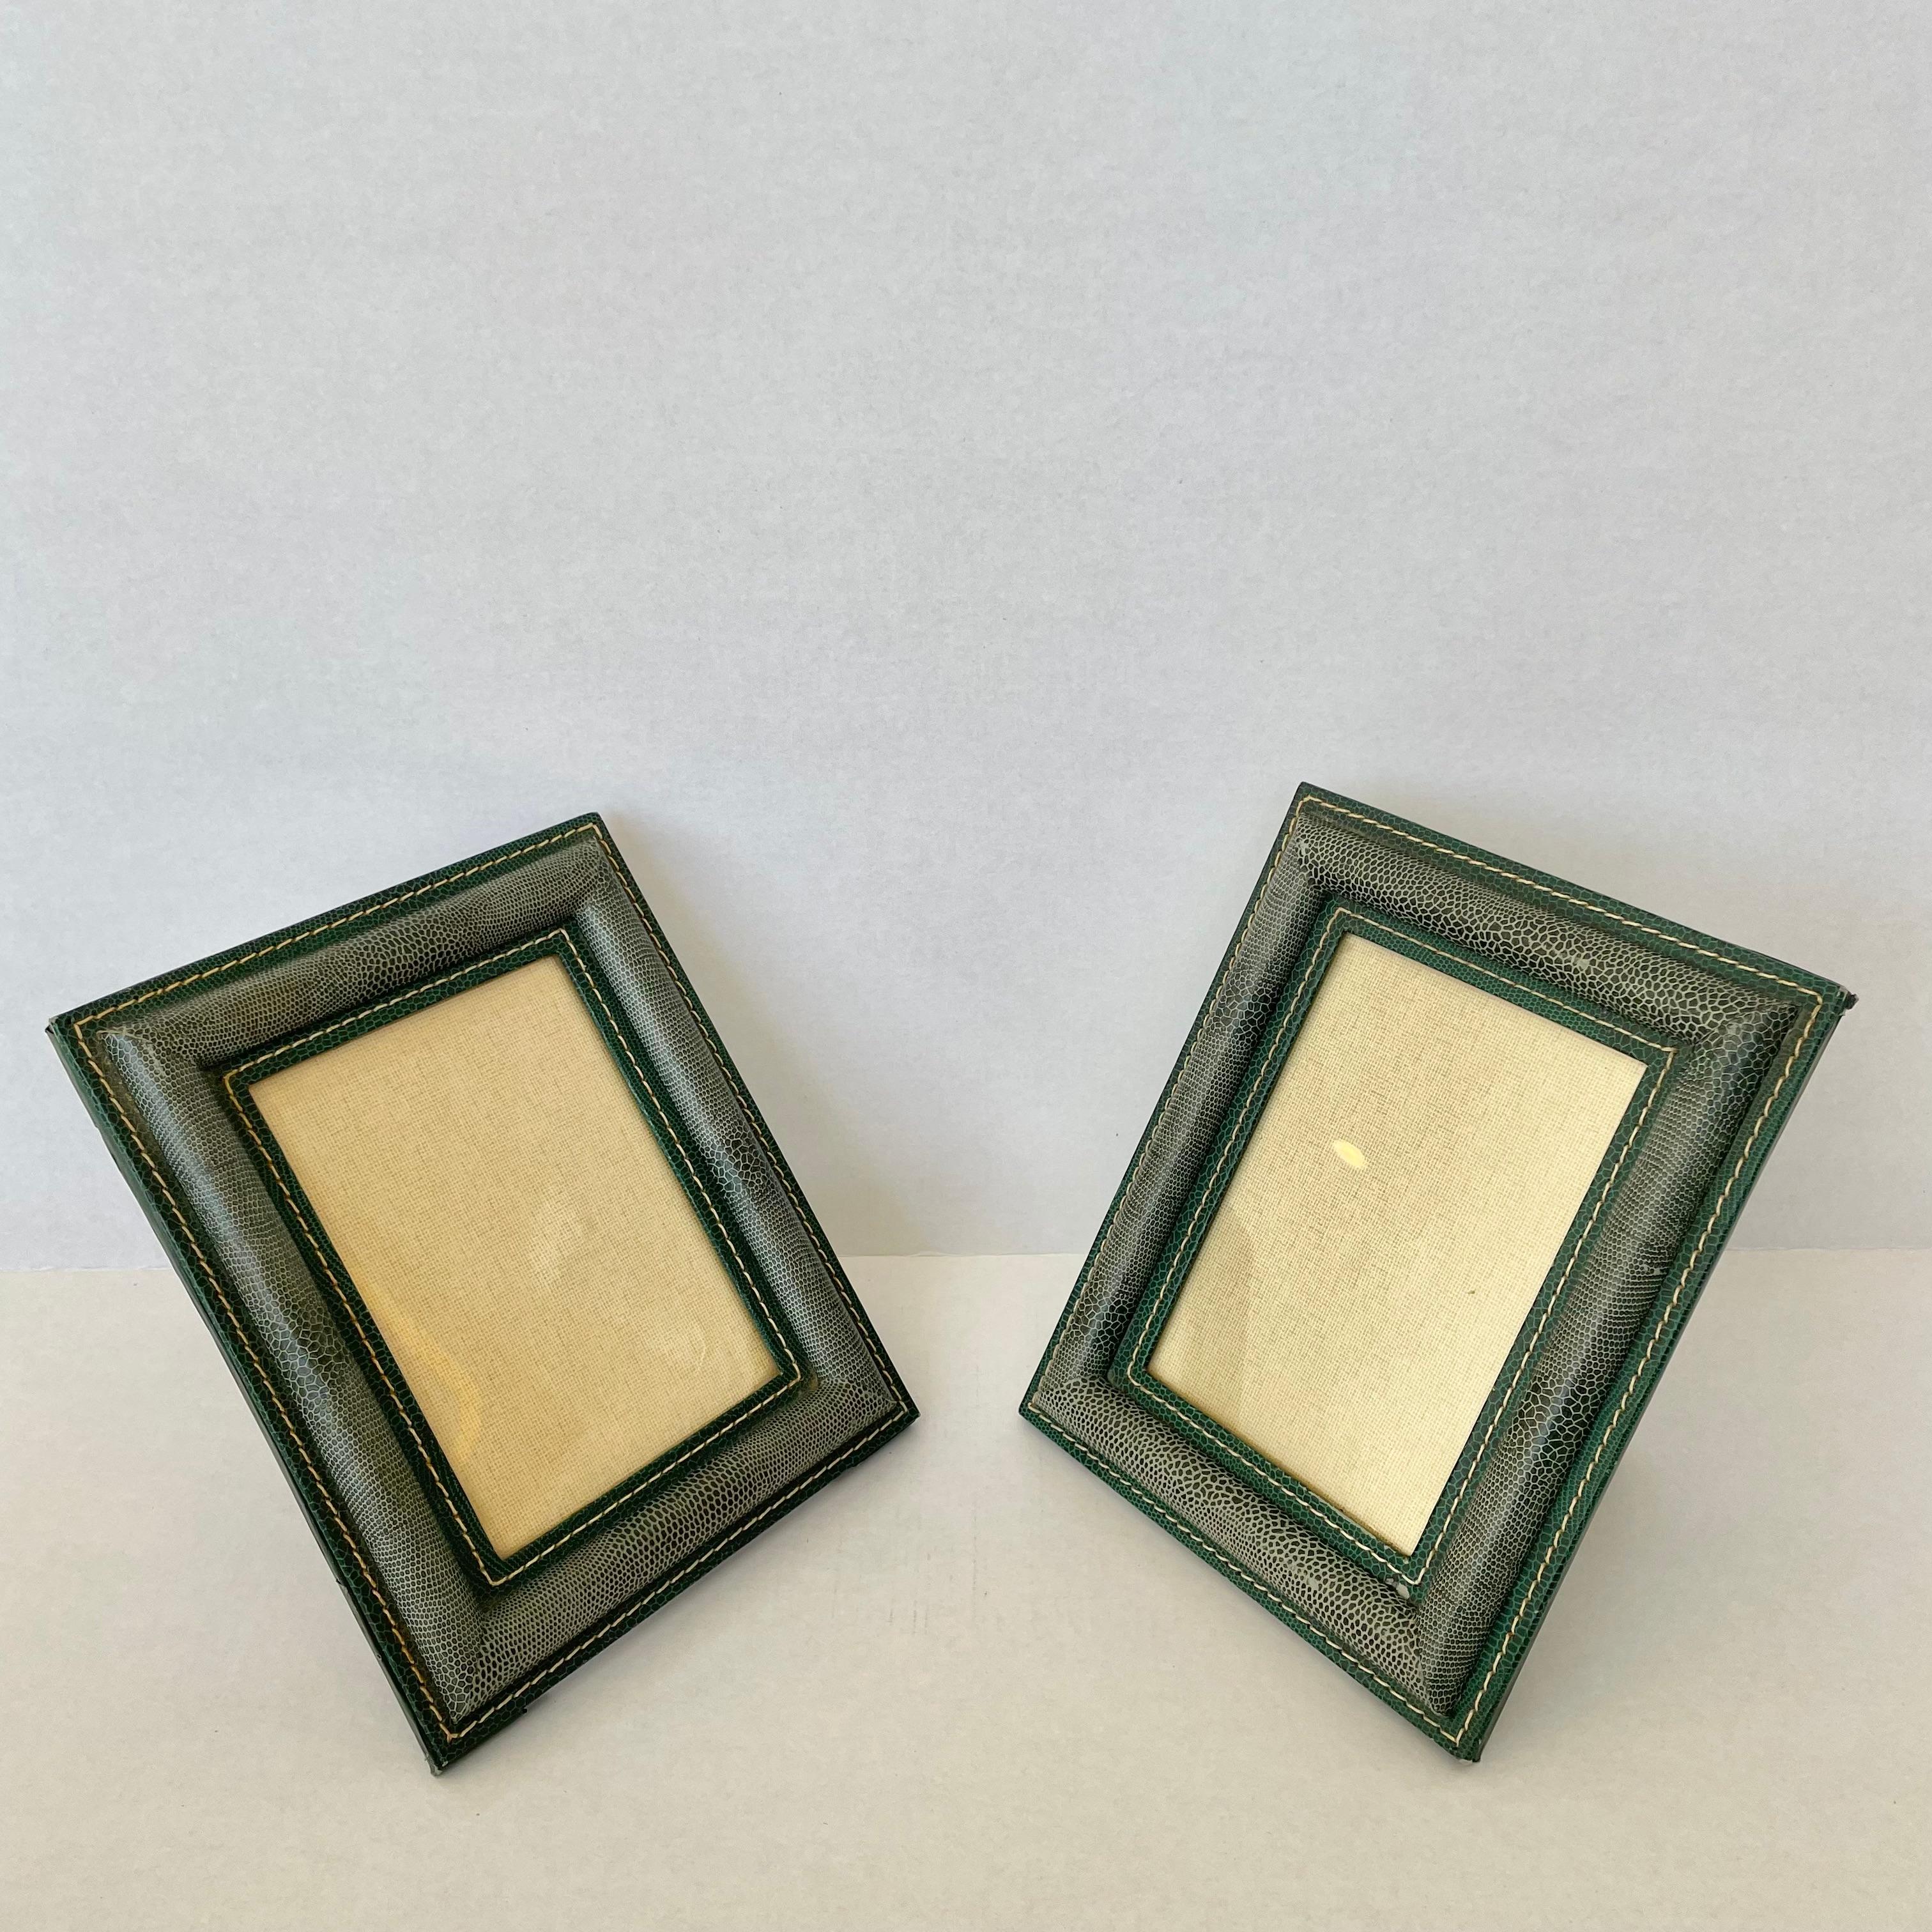 Classic French leather picture frame in the style of Jacques Adnet. Green leather with signature Adnet contrast stitching. Very good vintage condition. Great patina and age to leather. Priced individually. 

  